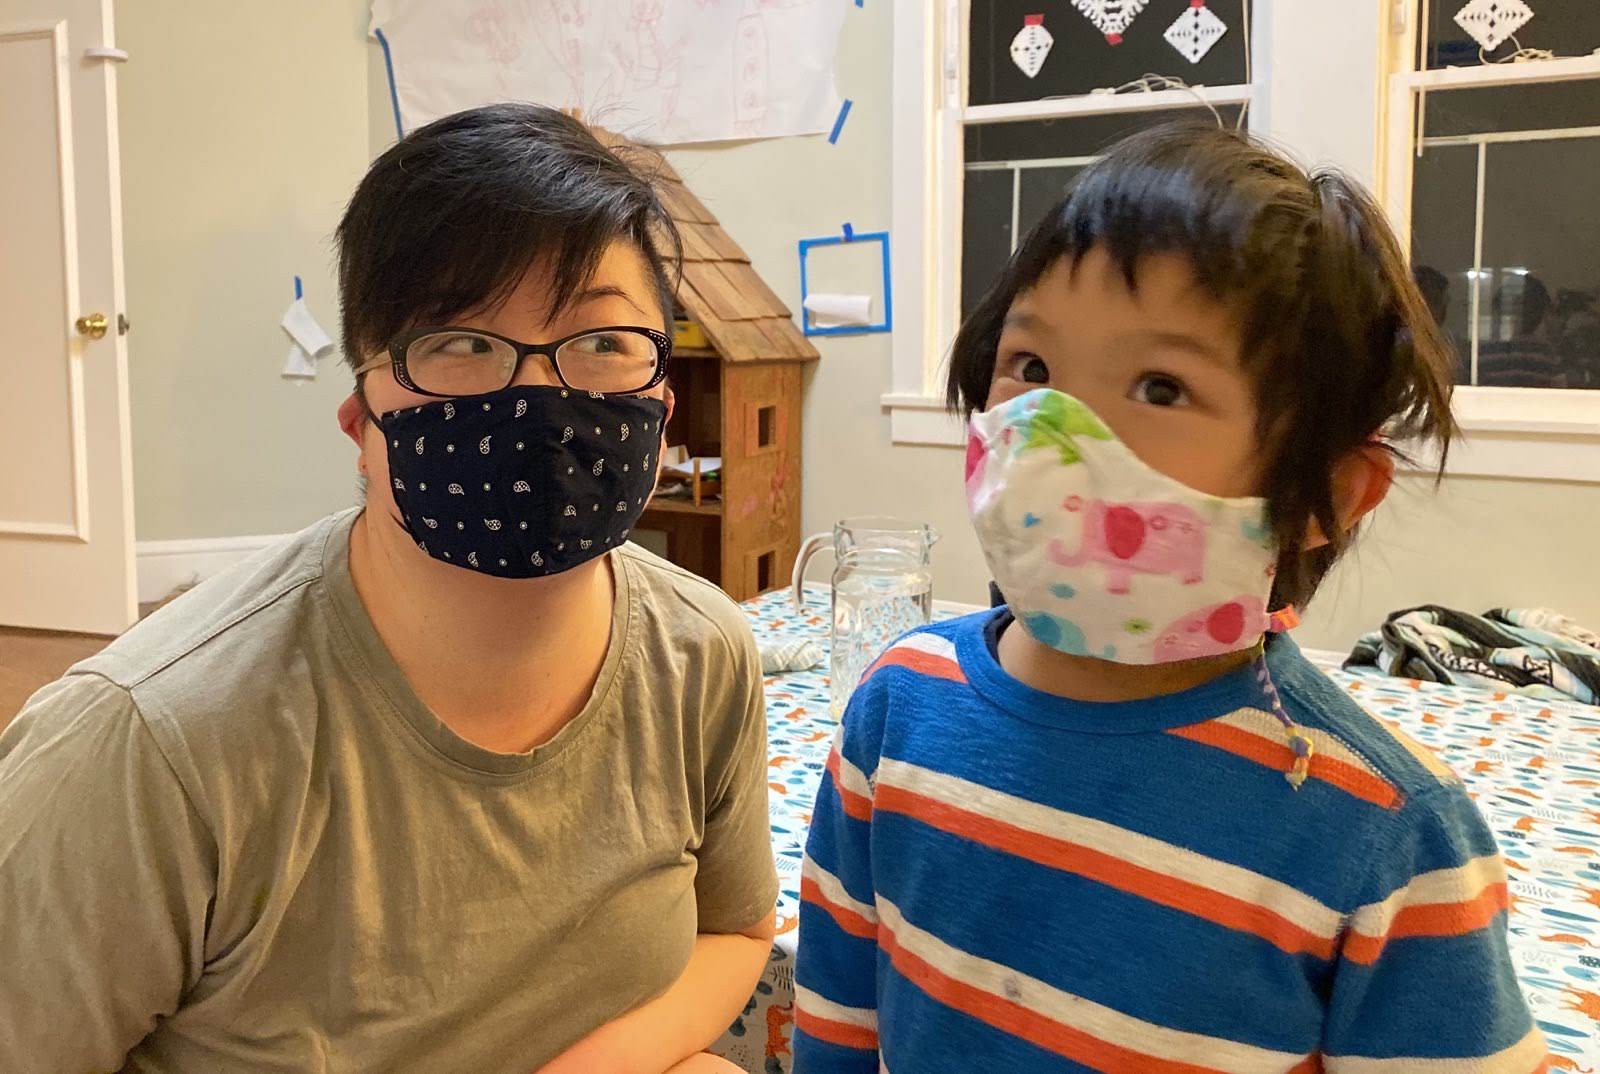 Short-haired East Asian American parent and young child with masks